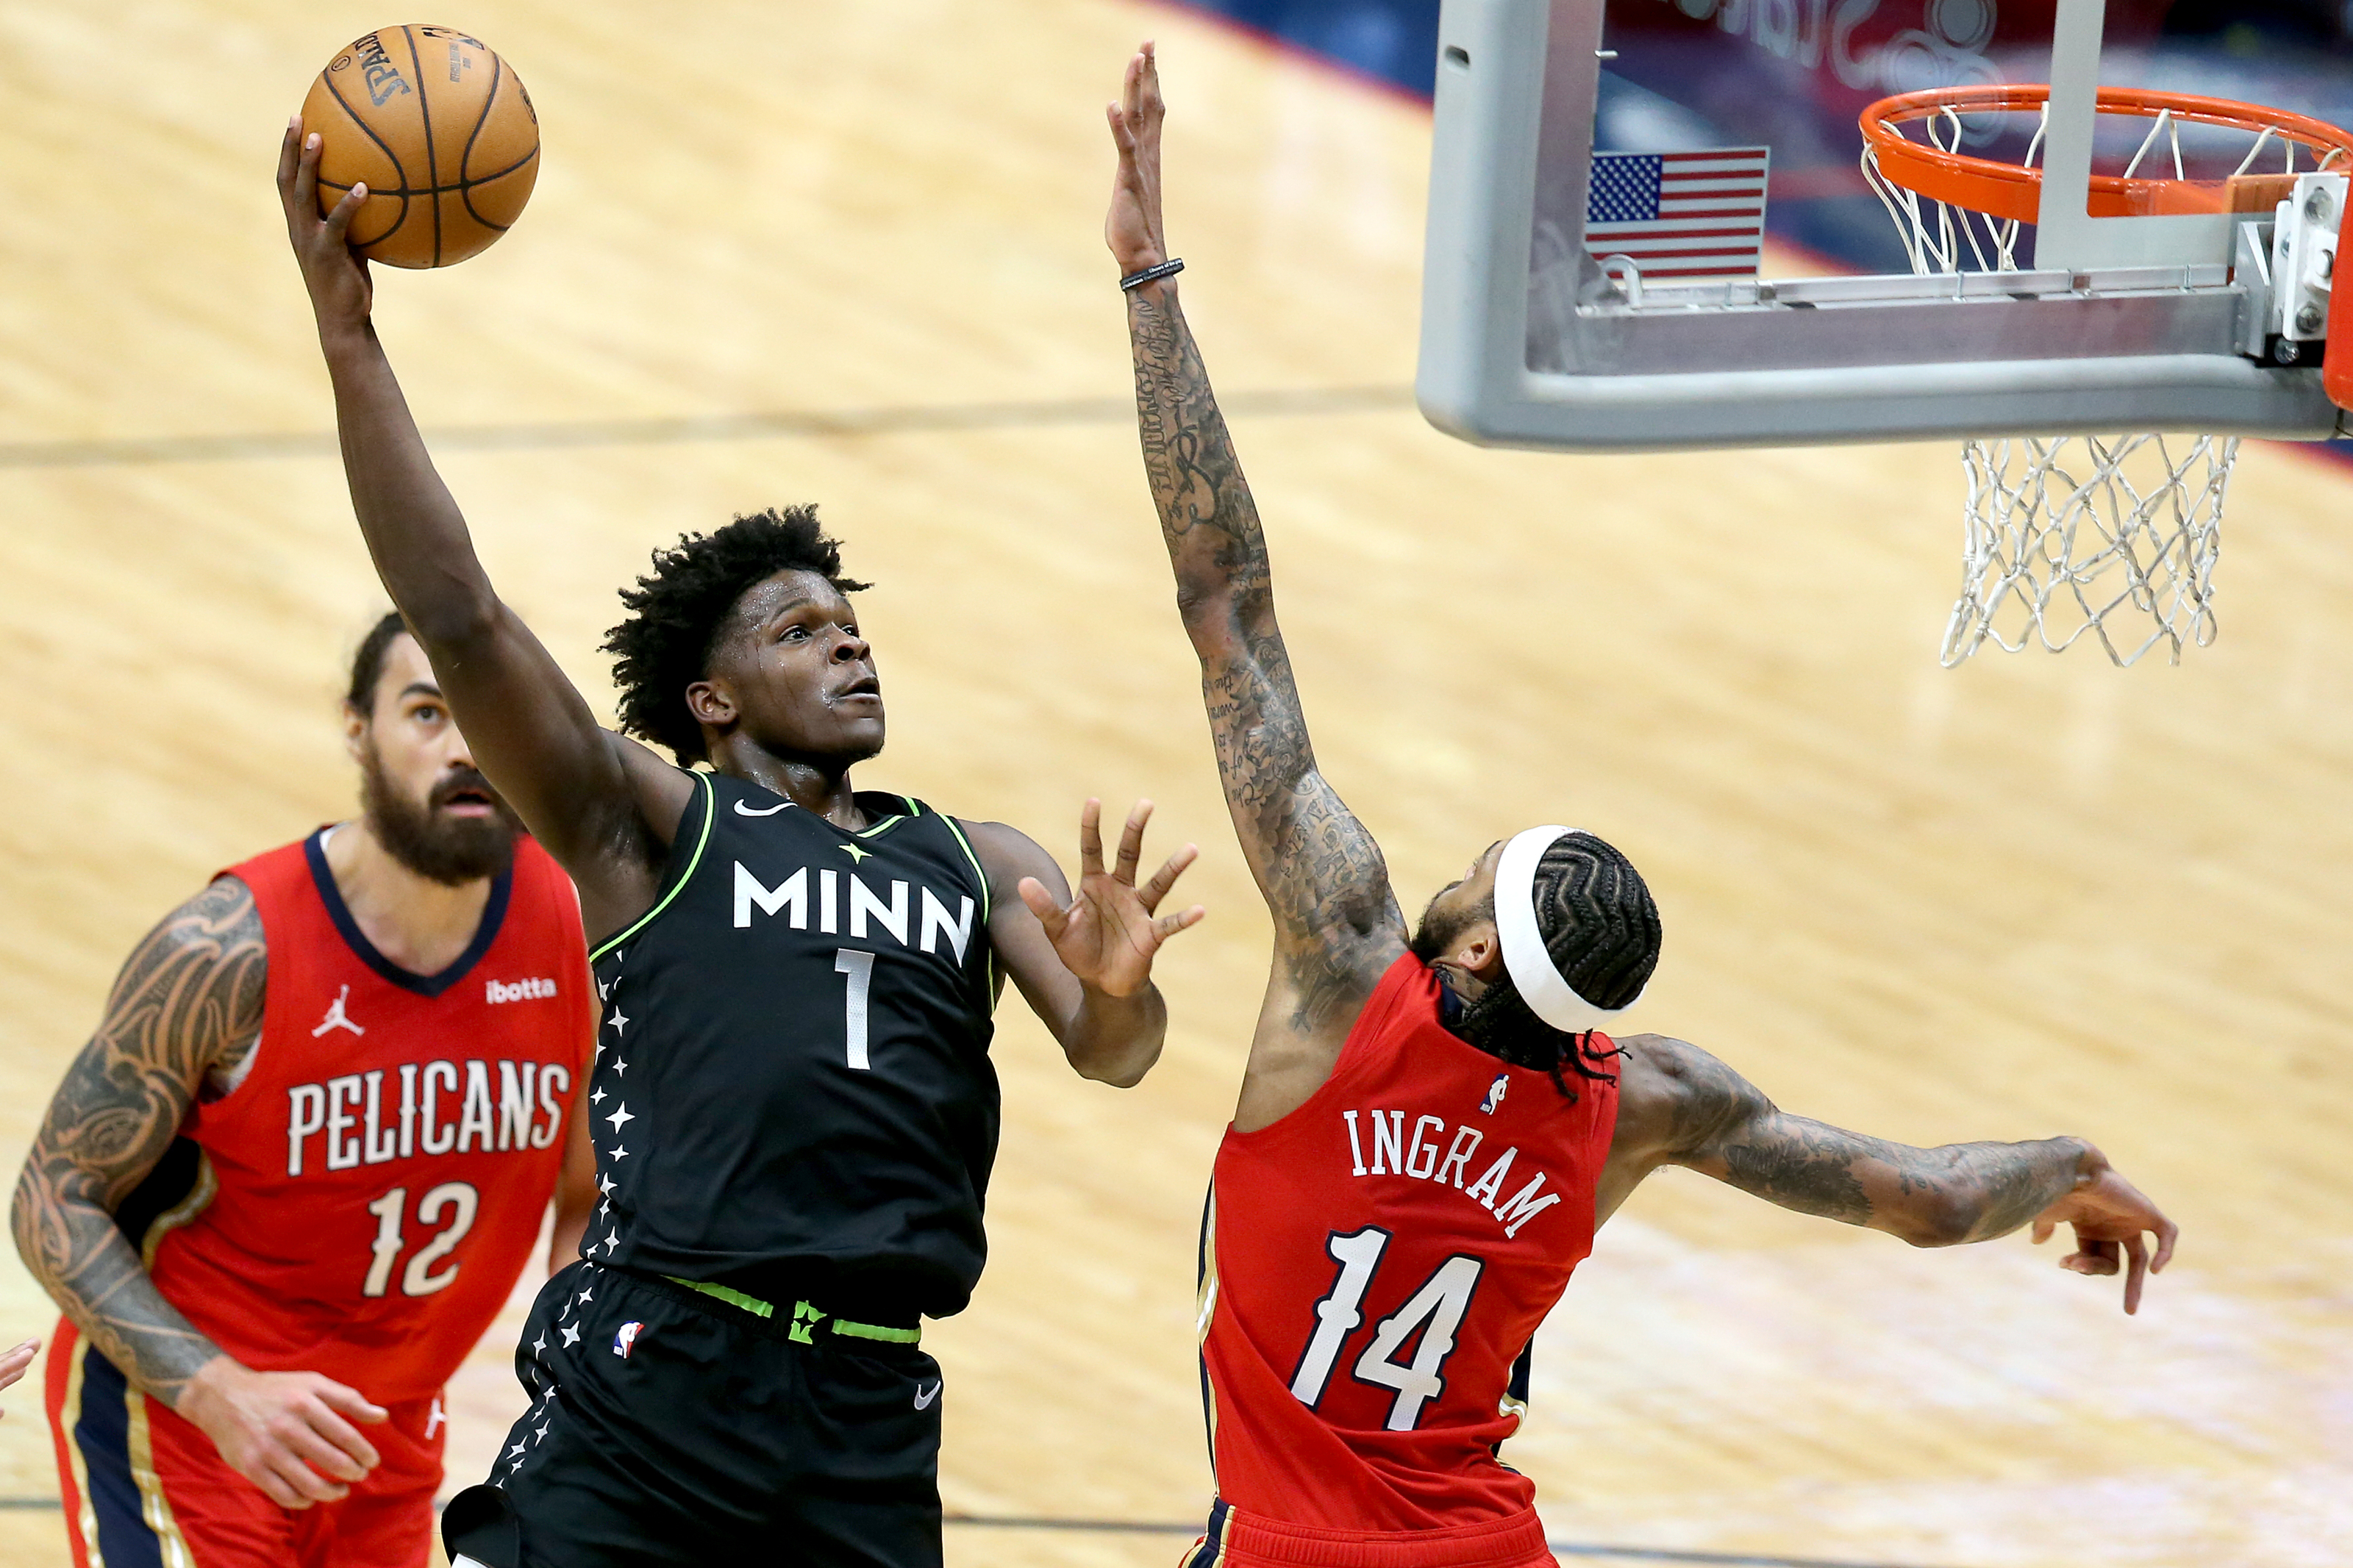 Player grades from Minnesota Timberwolves' win over the Pelicans